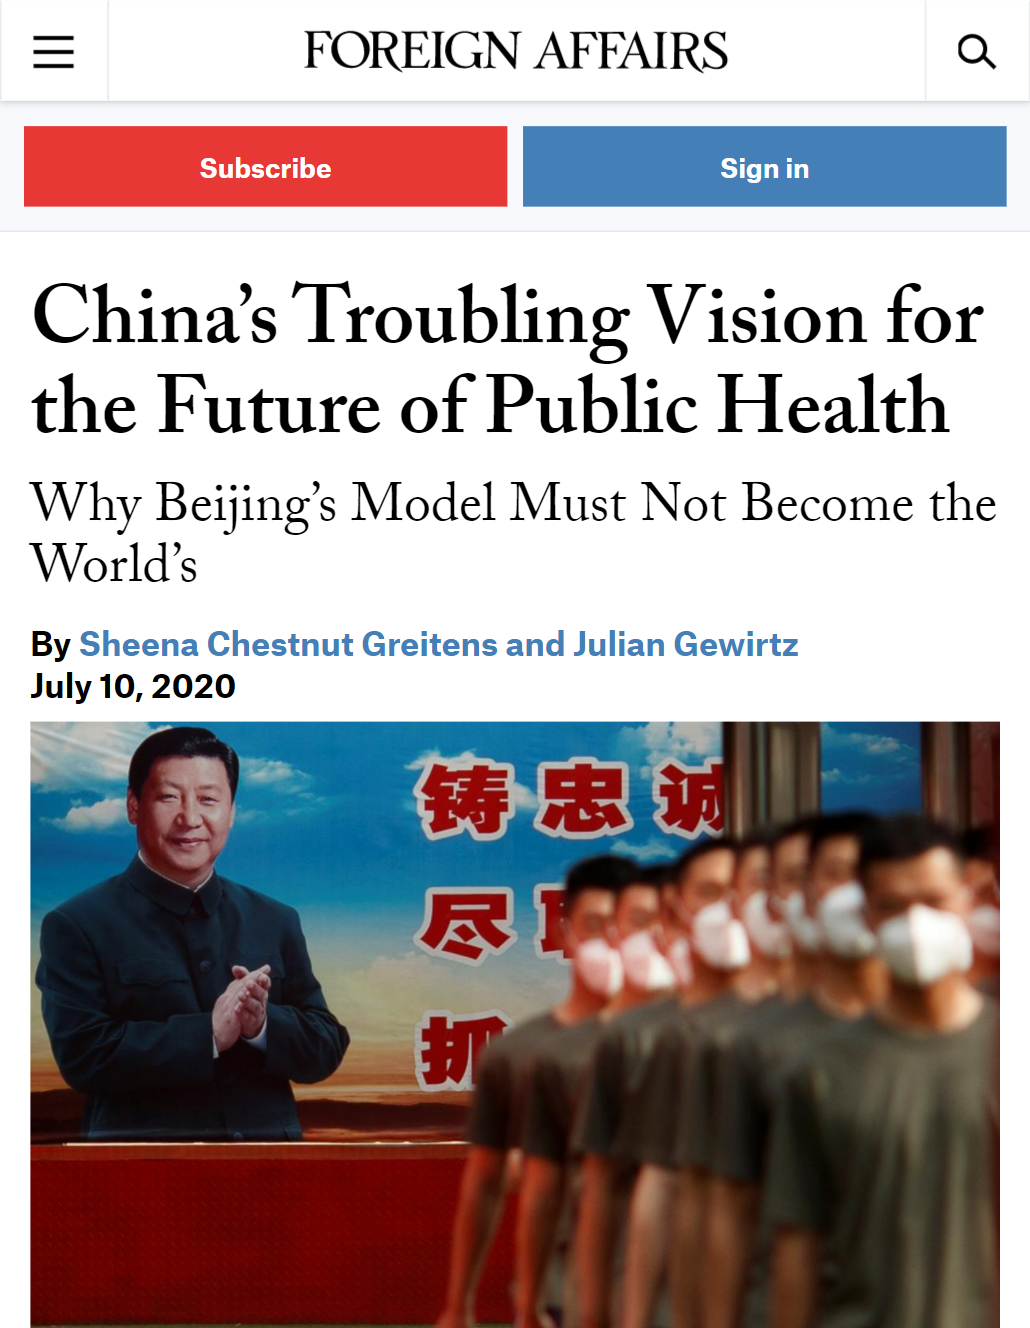 hina’s Troubling Vision for the Future of Public Health.”